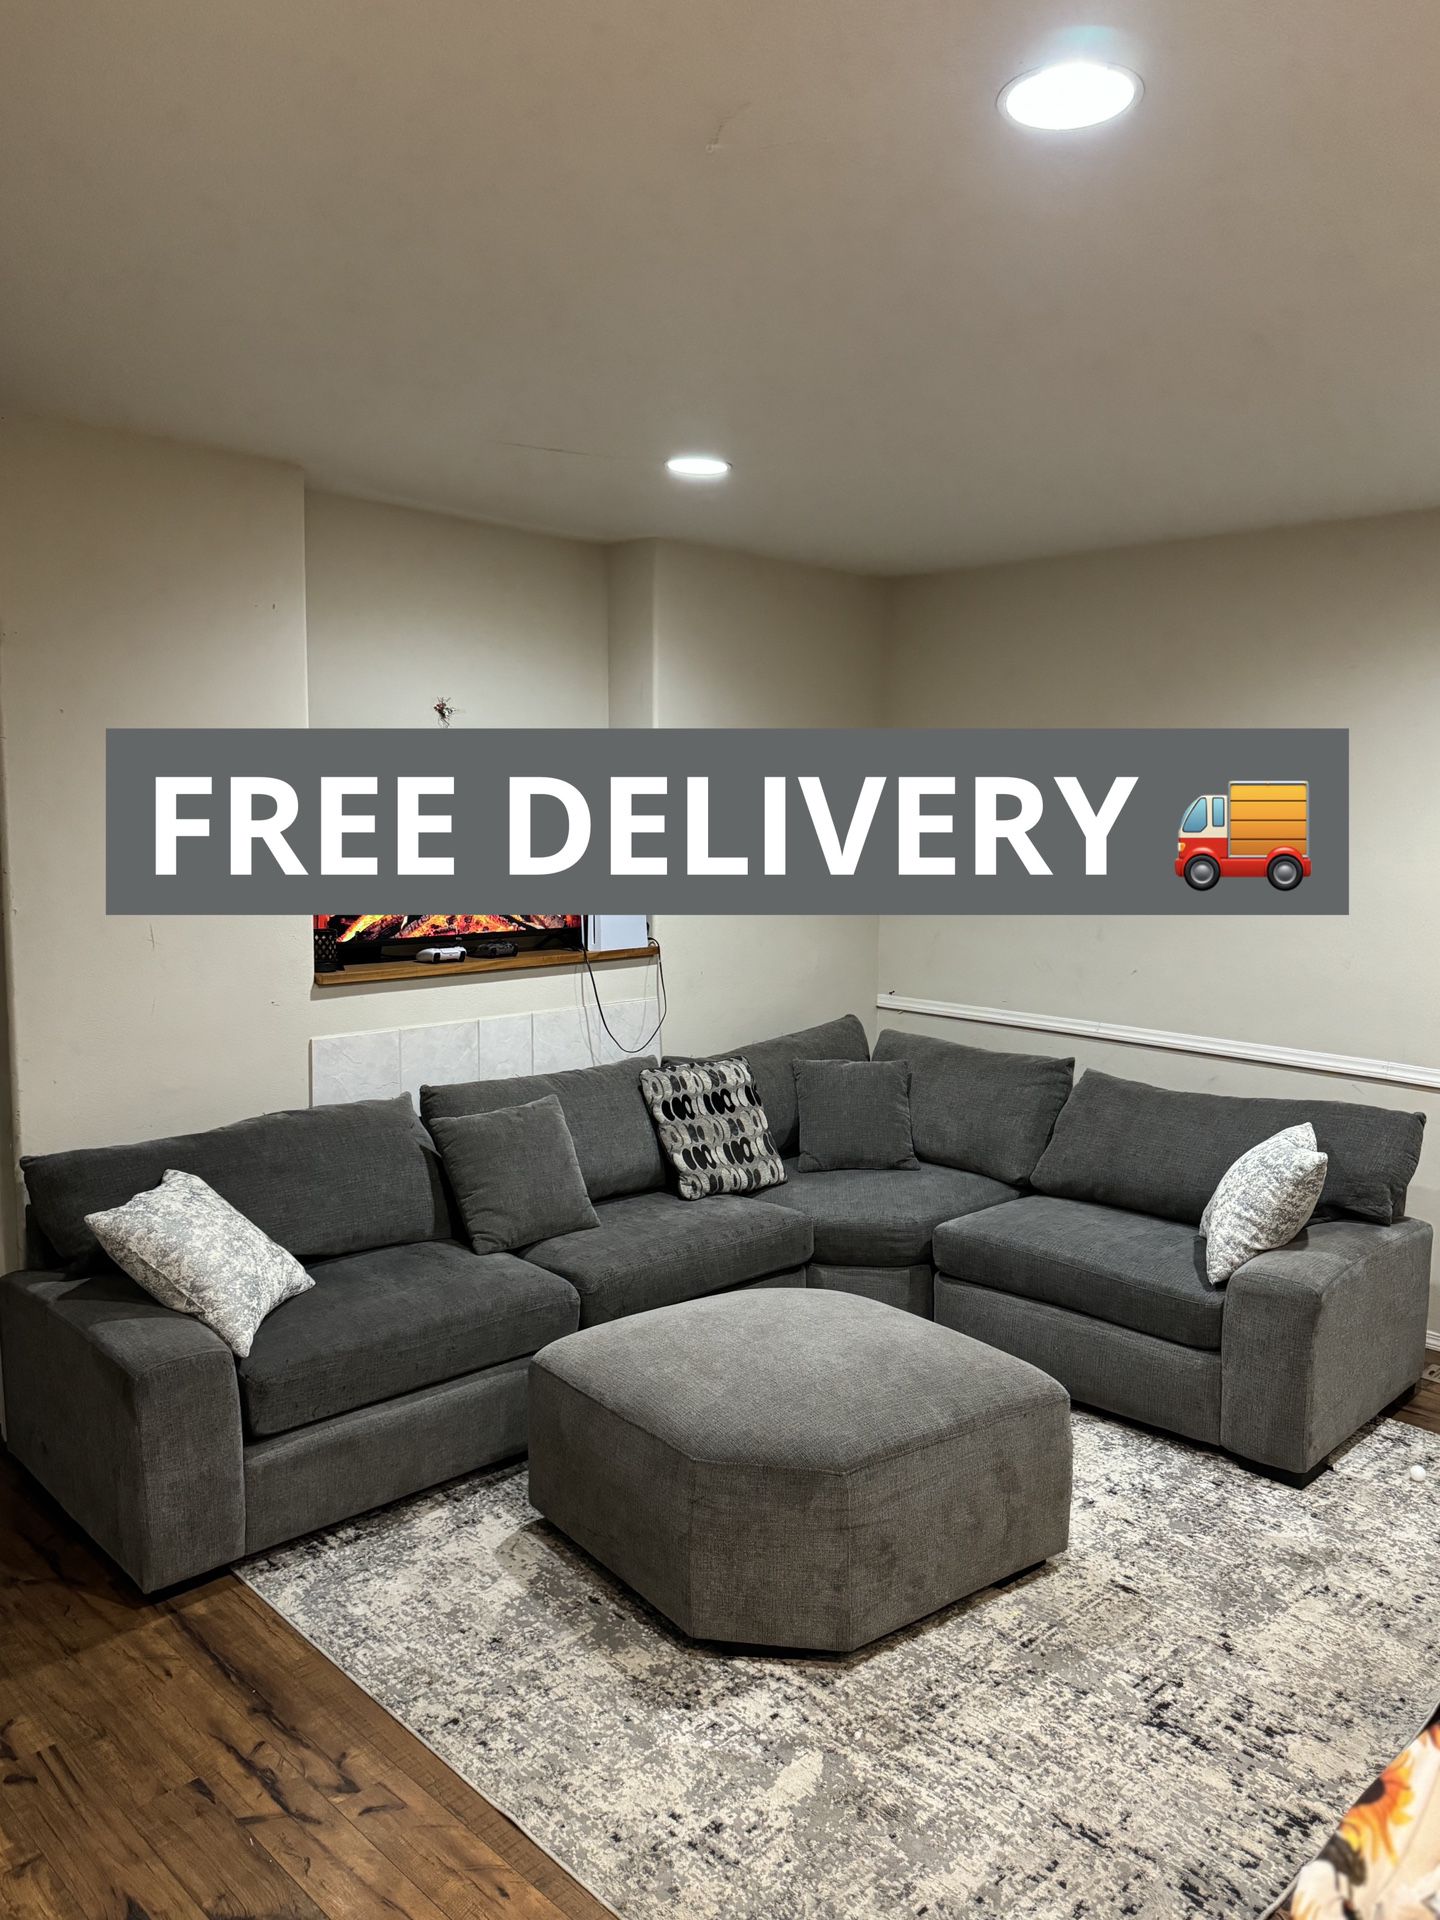 Modular Gray Sectional Couch 🛋️- FREE DELIVERY 🚚 